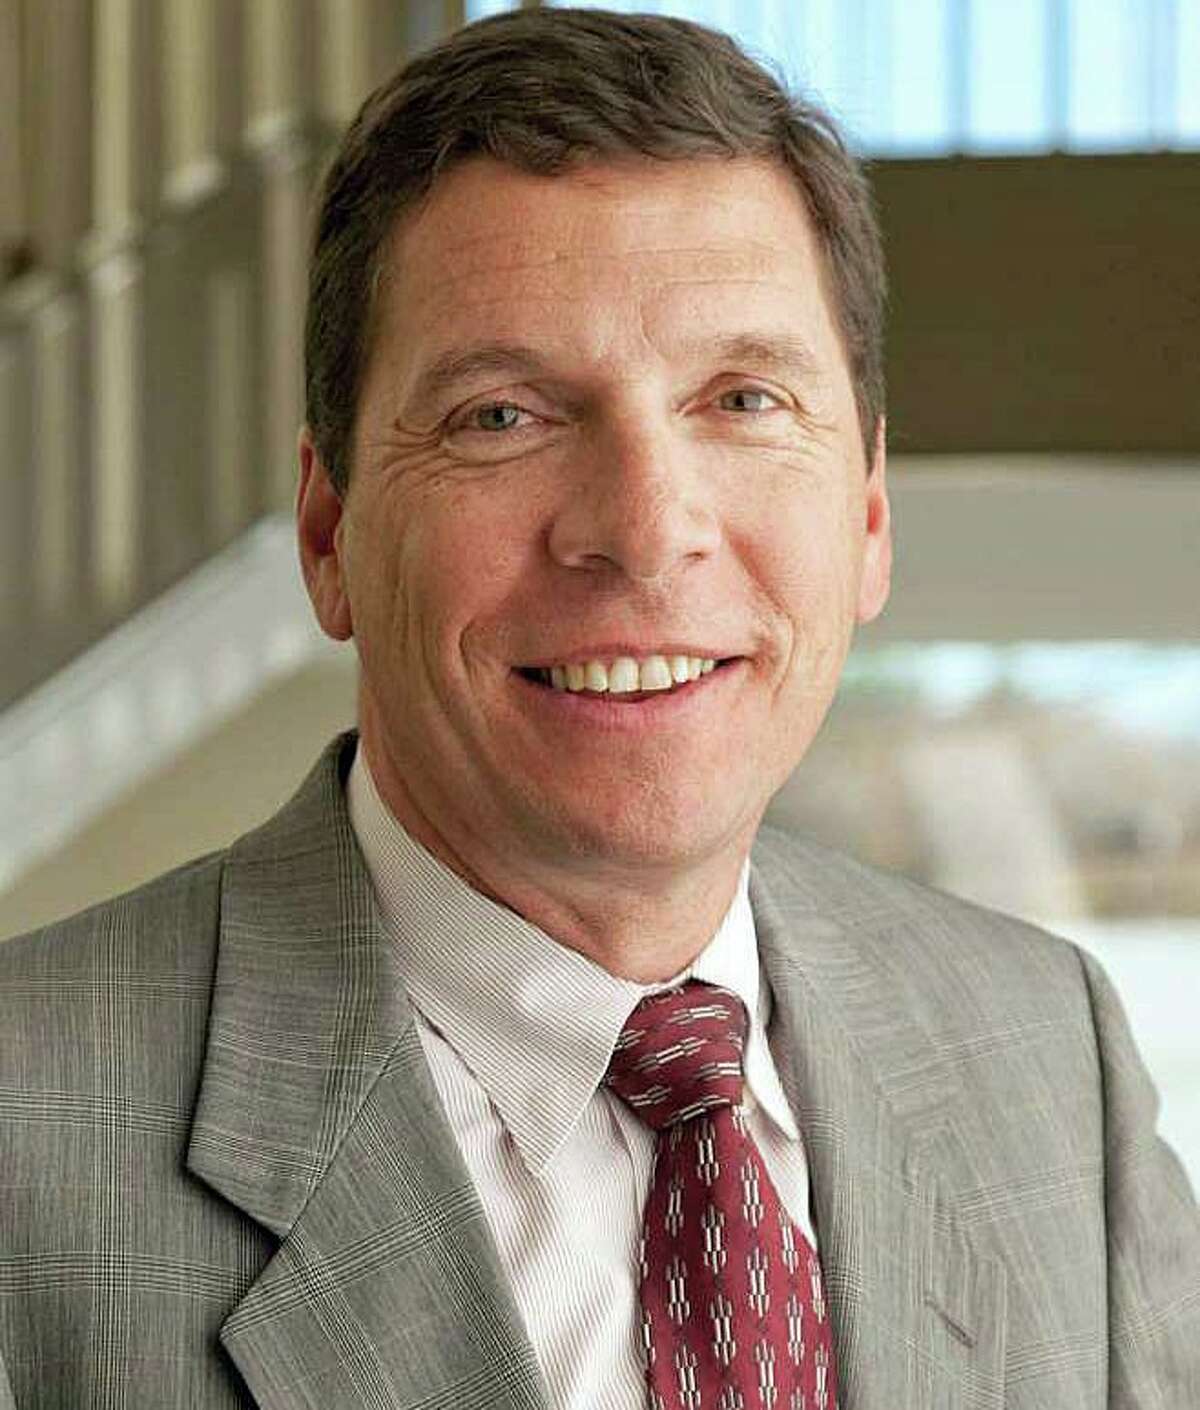 Dr. John Murphy, president and CEO of Nuvance Health